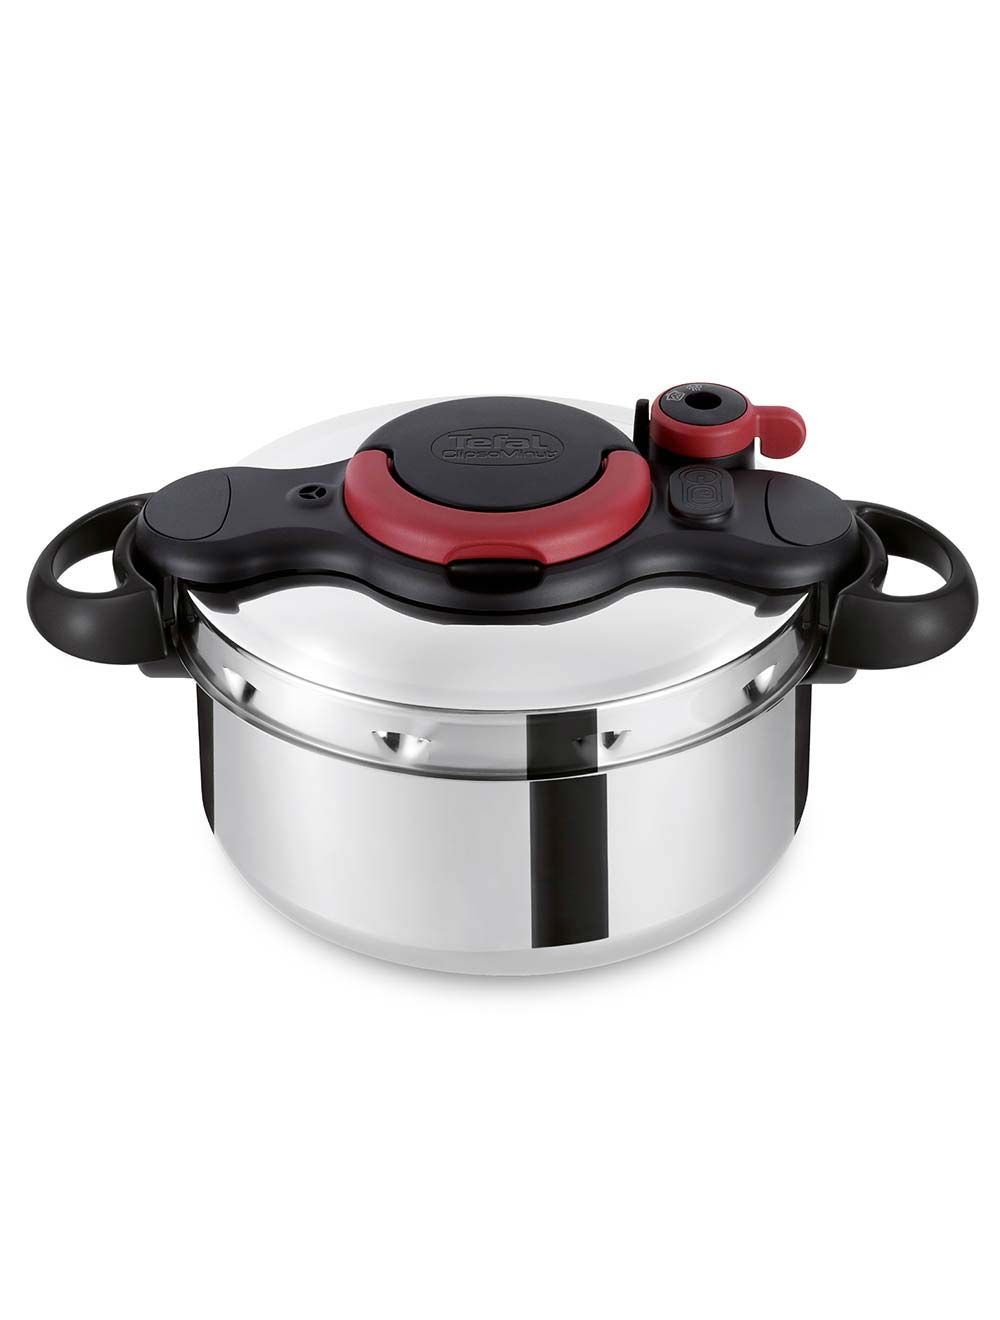 Tefal Clipso Minute Easy 9 Litre Pressure Cooker, P4624966